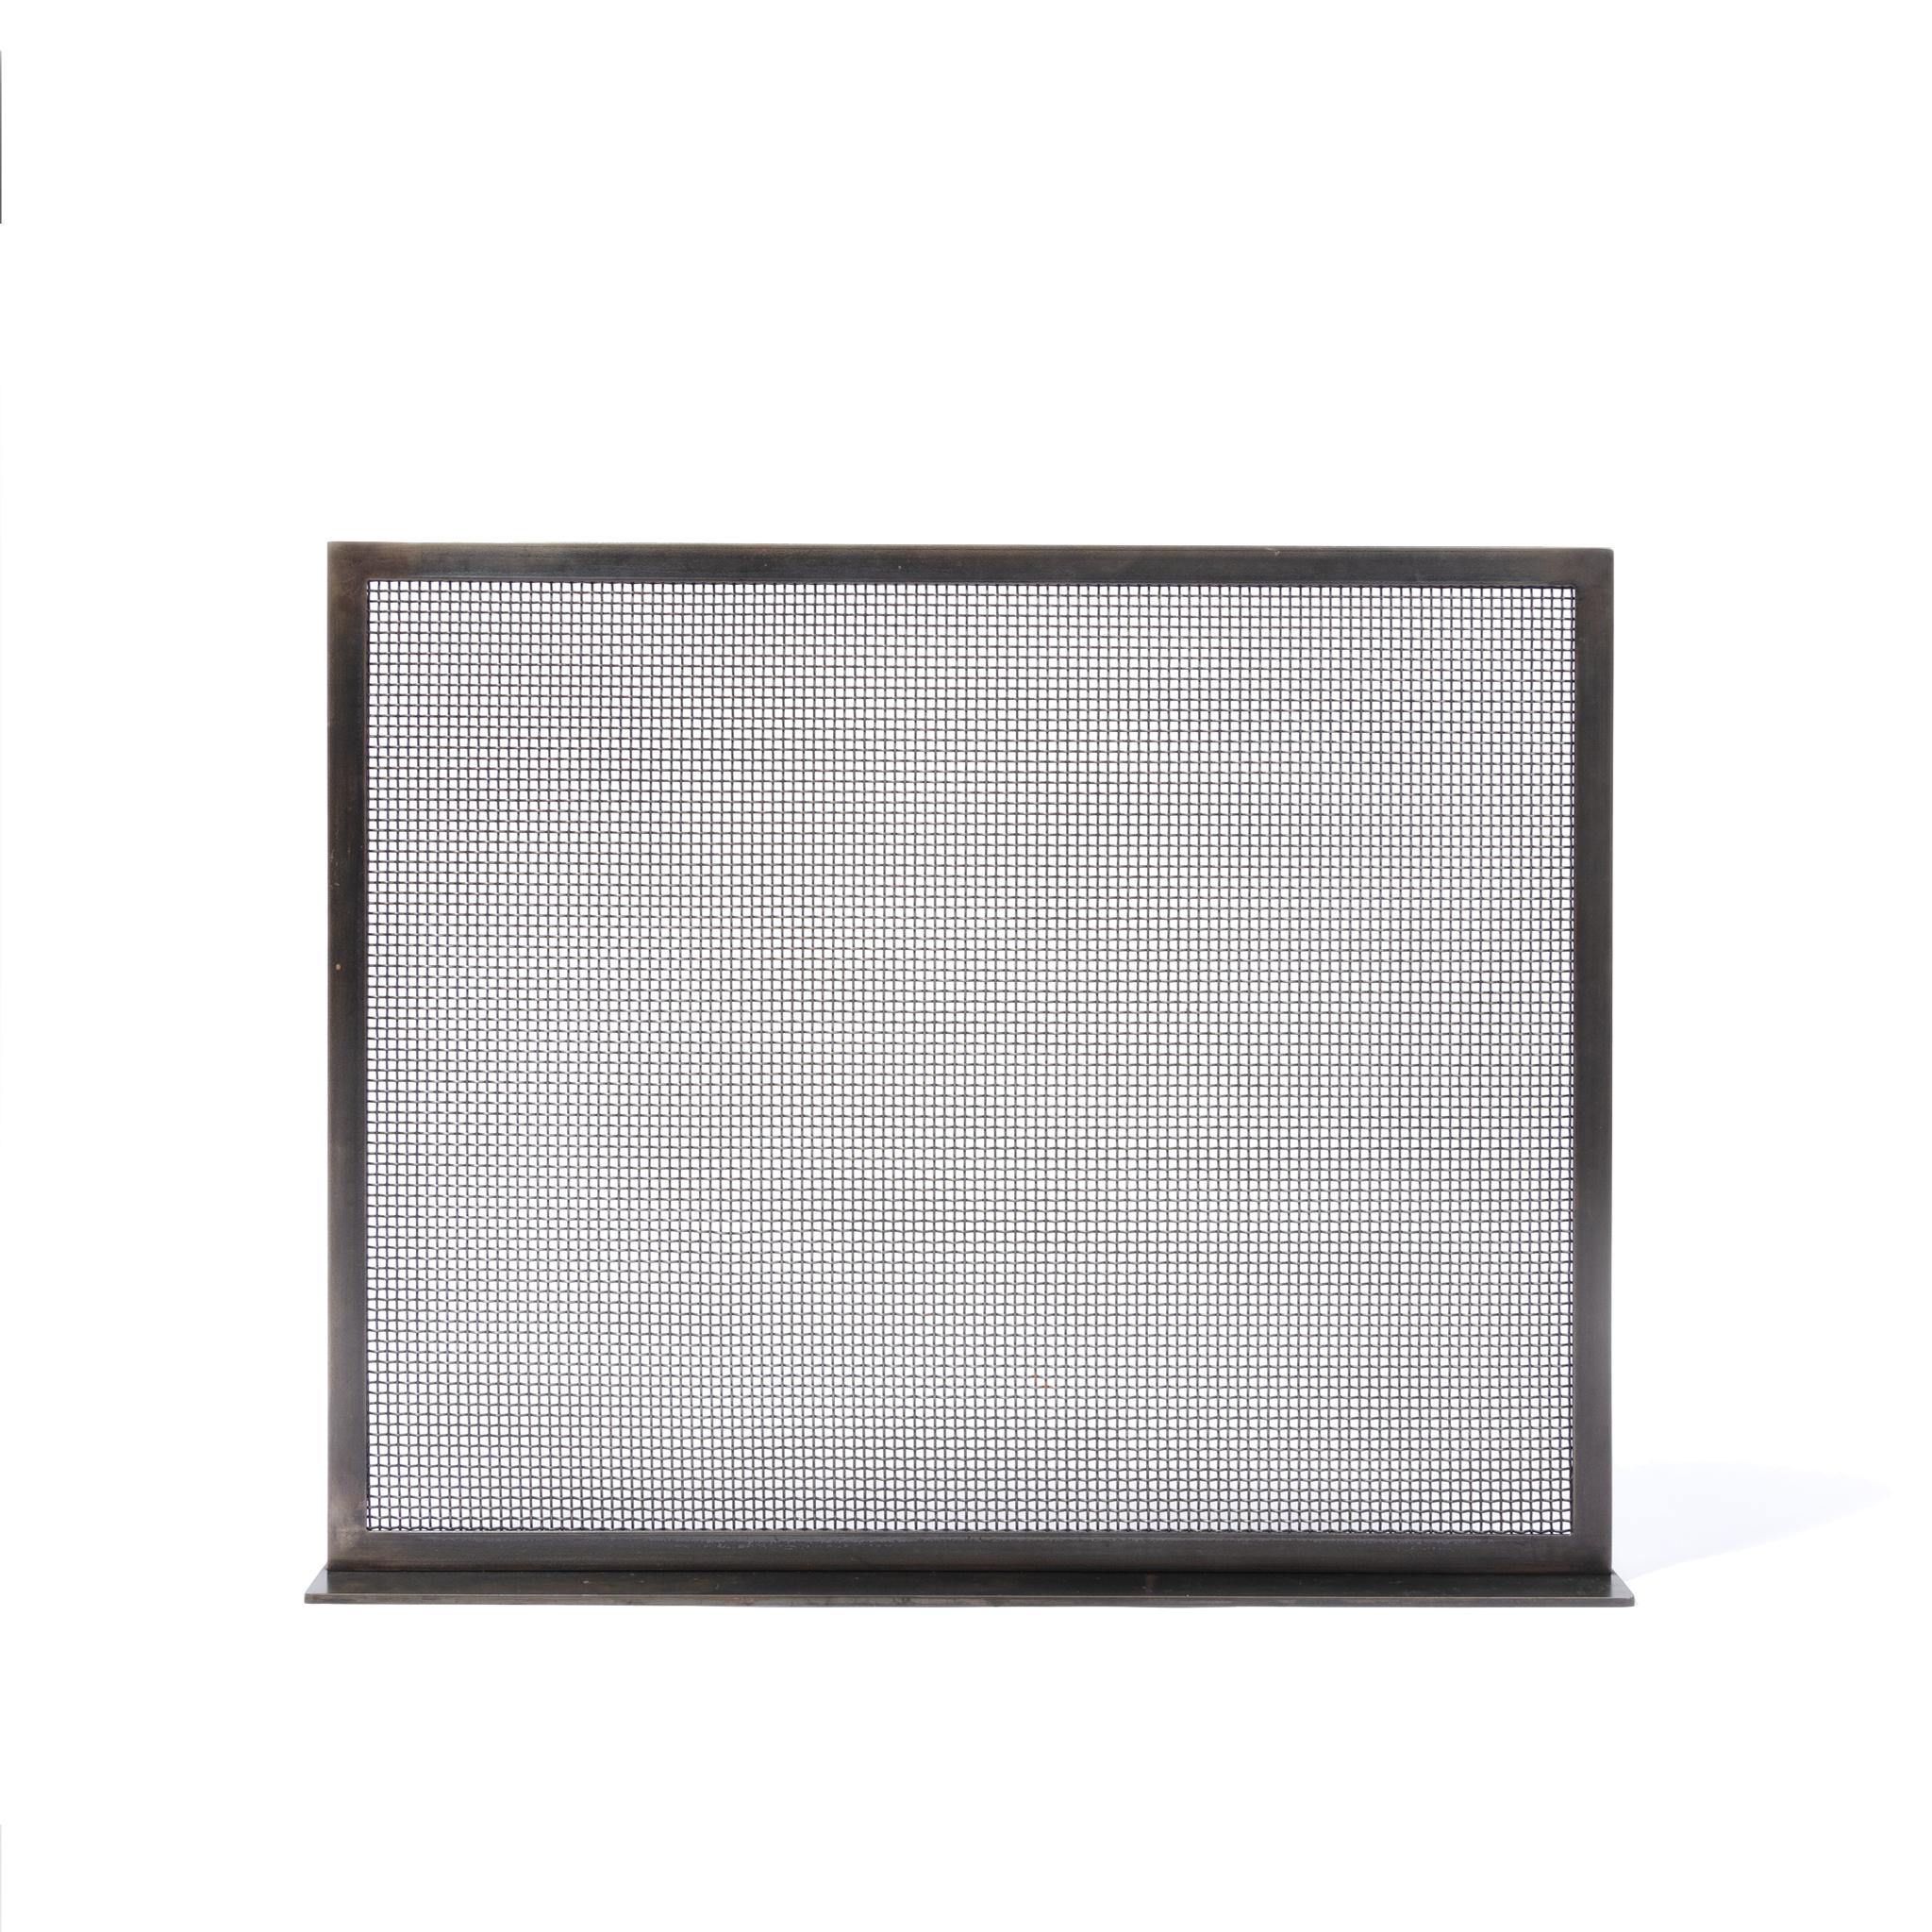 The Court Screen is a modern metal fireplace screen cover that can be used flush fitted into the fireplace opening or can stand right outside a fireplace opening. It protects from sparks and minimizes damage to stone around your fireplace. 

The